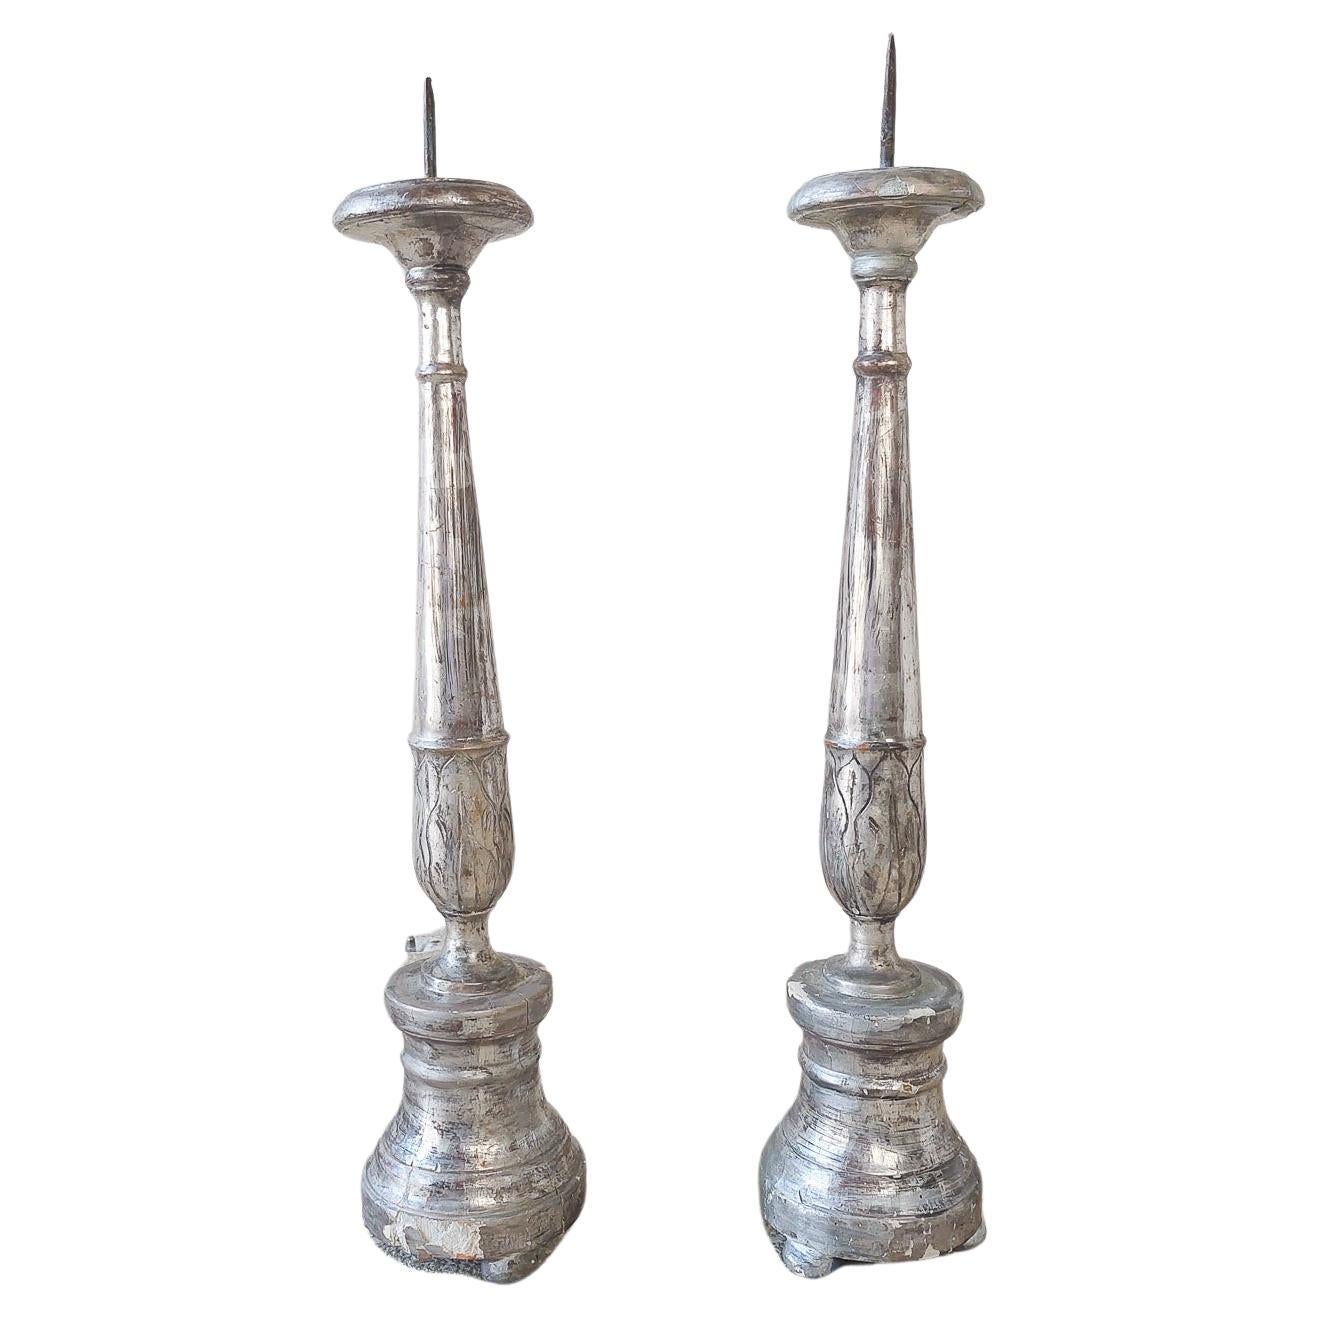 Pair of Antique Carved Wood and Silver Plated Church Candlesticks 18th Century